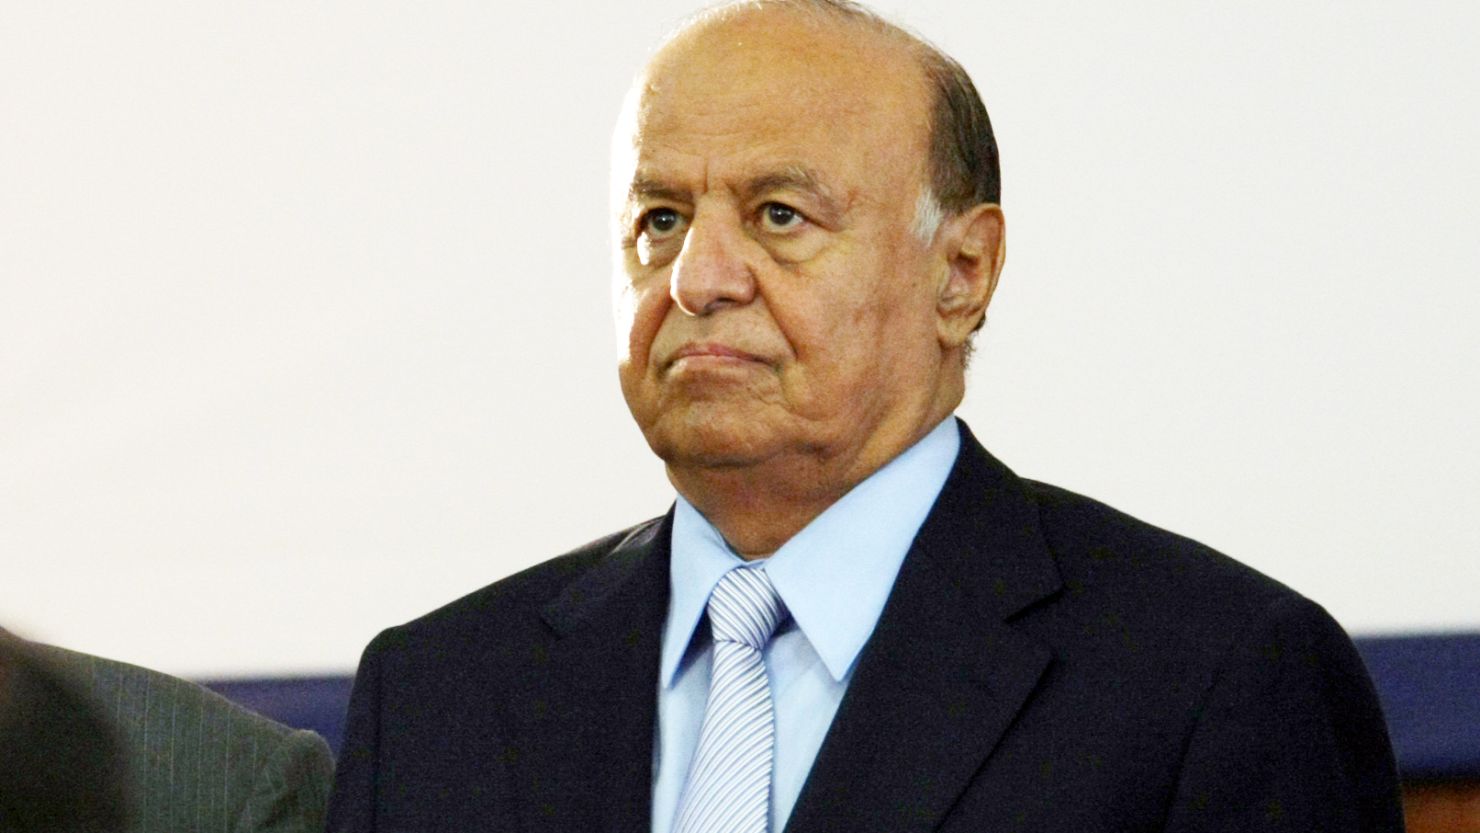 Abdurabuh Mansur Hadi, Yemen's vice president and acting leader, opened his election campaign Tuesday in Sanaa.